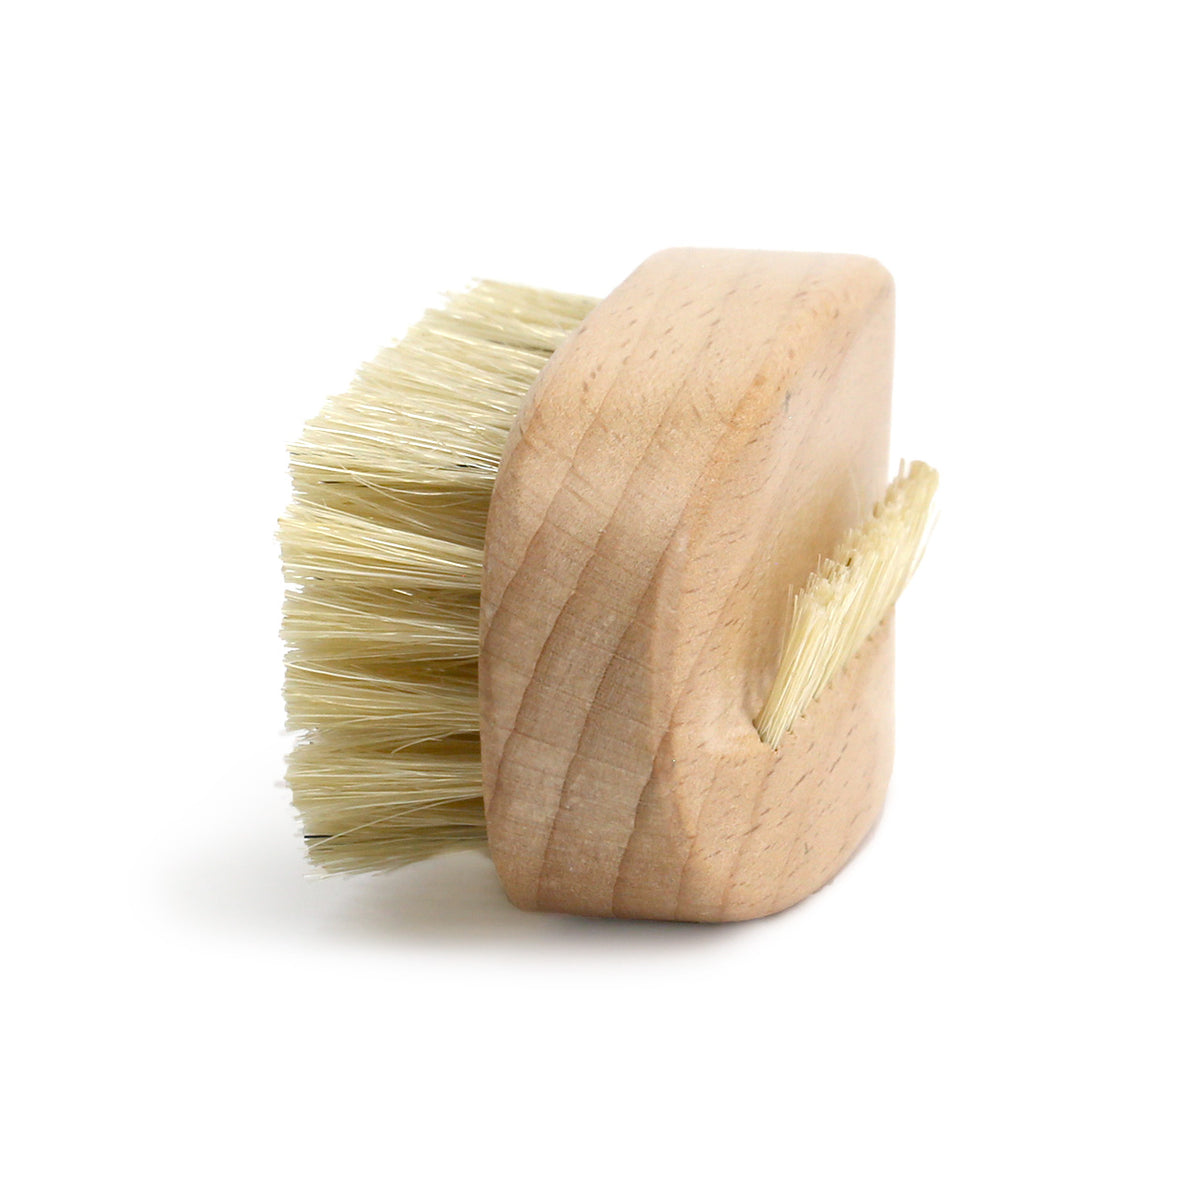 end view of the redecker oval wooden nail brush showing the angle of the top line of fingernail bristles